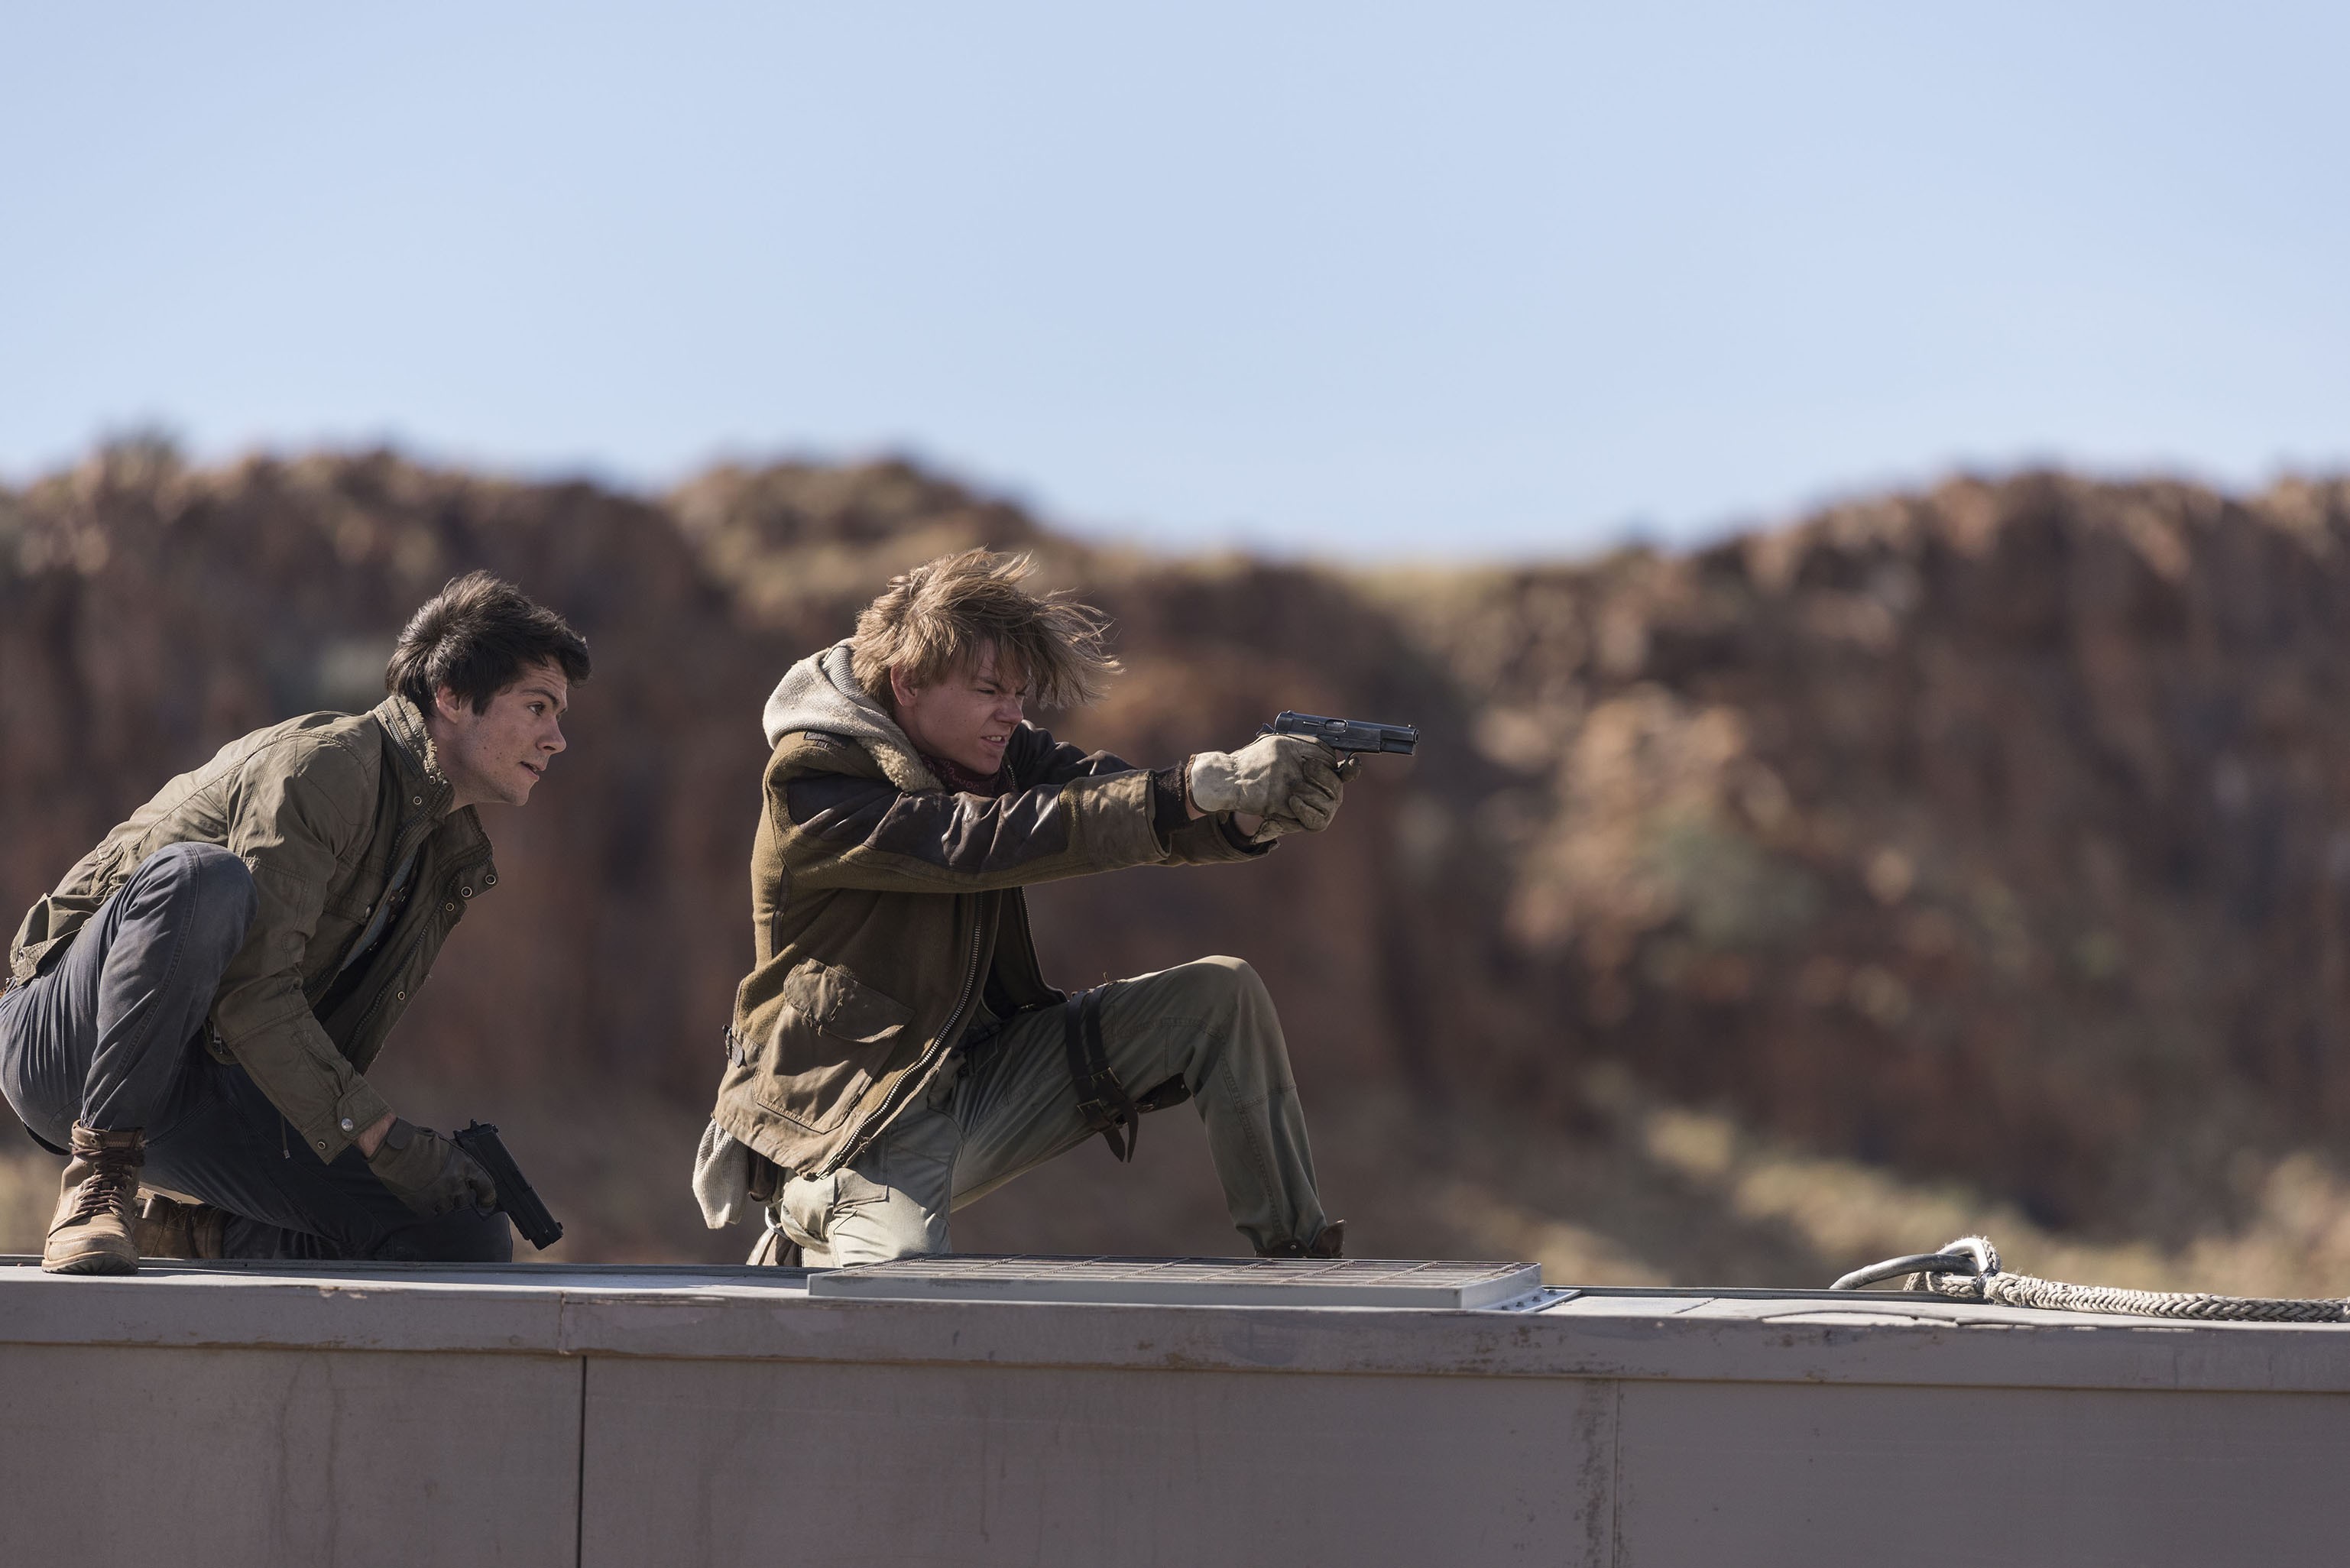 Movie review: 'Maze Runner: The Death Cure' runs in circles